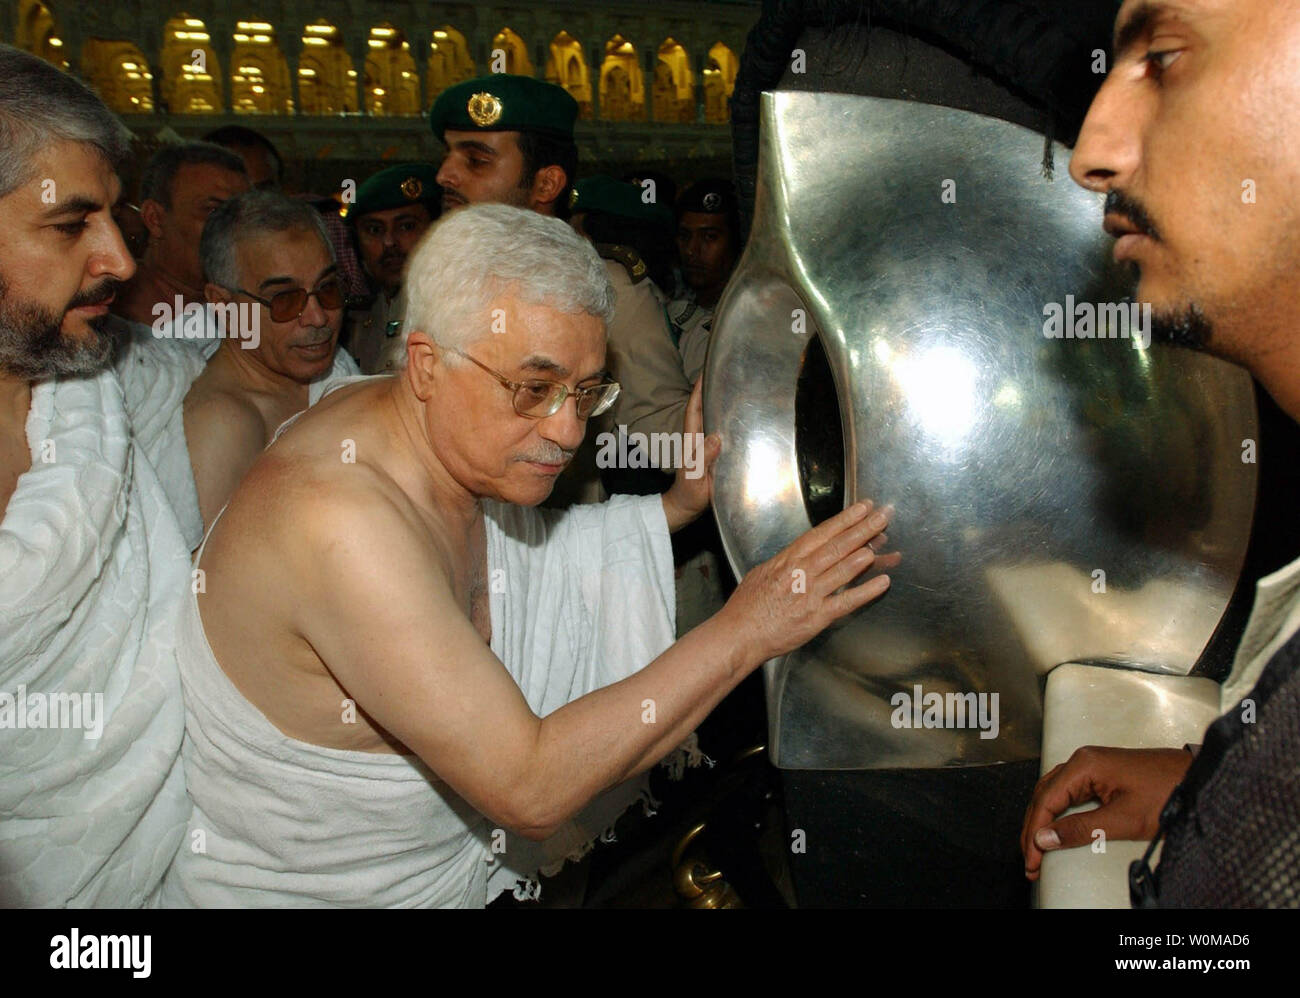 Hamas leader Khaled Meshaal (L) and Palestinian President Mahmoud Abbas stand in front of the black stone inside the Kaaba in the Grand Mosque during a pilgrimage called the Umrah, in Mecca, Saudi Arabia on February 9, 2007. Hamas and Fatah factions signed a power sharing agreement aimed at ending months of fighting.    (UPI Photo/Omar Rashidi) Stock Photo